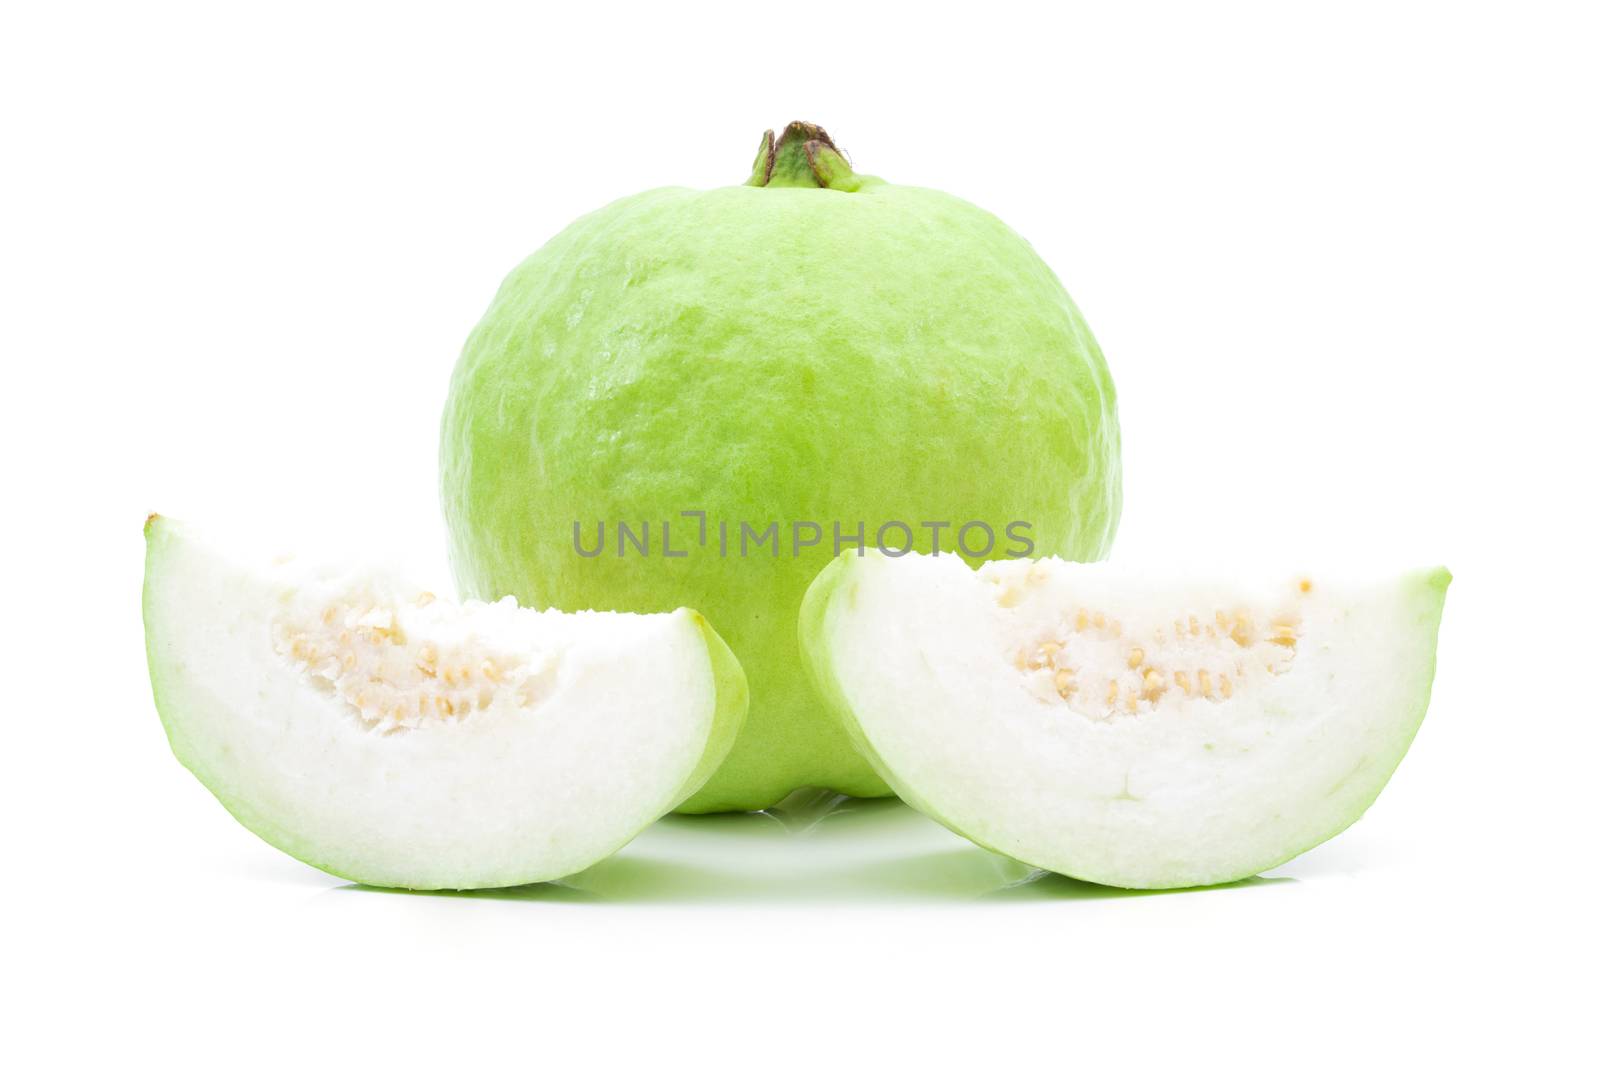 Guava fruit on a white background